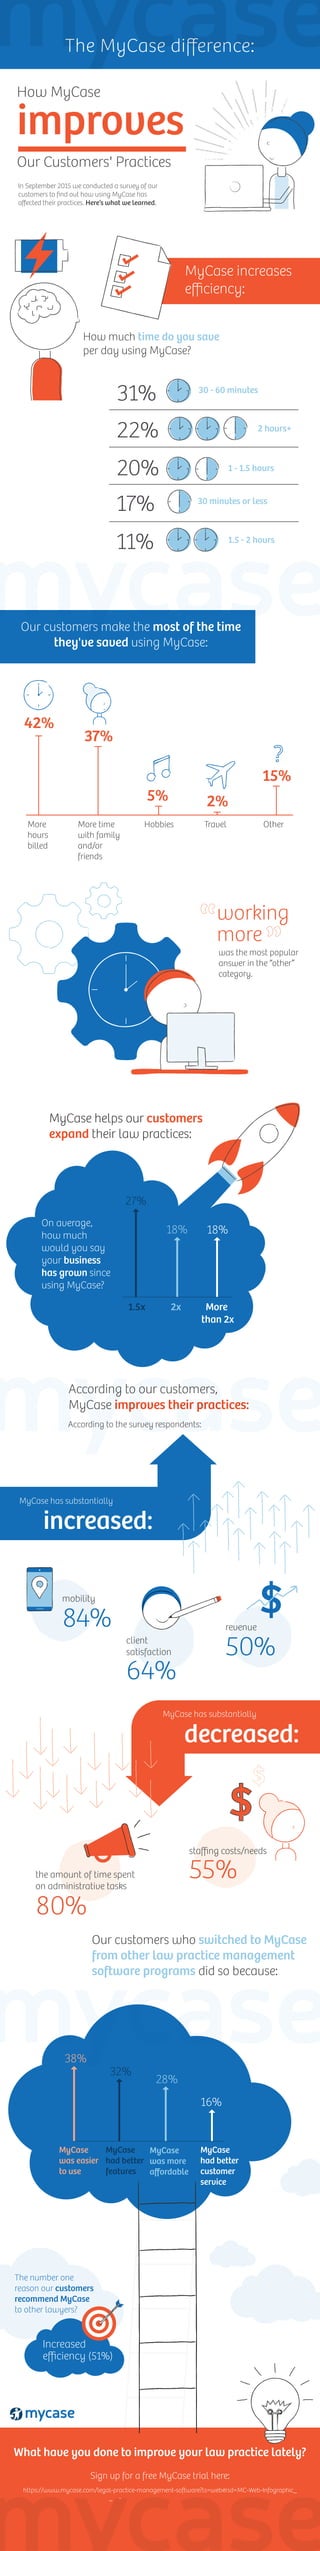 In September 2015 we conducted a survey of our
customers to ﬁnd out how using MyCase has
aﬀected their practices. Here’s what we learned.
The MyCase diﬀerence:
improves
How MyCase
Our Customers' Practices
MyCase helps our customers
expand their law practices:
On average,
how much
would you say
your business
has grown since
using MyCase?
1.5x 2x More
than 2x
27%
18% 18%
Our customers make the most of the time
they've saved using MyCase:
42%
37%
15%
More
hours
billed
More time
with family
and/or
friends
Other
5%
Hobbies
2%
Travel
How much time do you save
per day using MyCase?
31% 30 - 60 minutes
20% 1 - 1.5 hours
11% 1.5 - 2 hours
22% 2 hours+
30 minutes or less
17%
MyCase increases
eﬃciency:
working
more
was the most popular
answer in the “other”
category.
Our customers who switched to MyCase
from other law practice management
software programs did so because:
According to our customers,
MyCase improves their practices:
According to the survey respondents:
80%
the amount of time spent
on administrative tasks
55%
staﬃng costs/needs
64%
client
satisfaction 50%
revenue84%
mobility
MyCase has substantially
increased:
MyCase has substantially
decreased:
The number one
reason our customers
recommend MyCase
to other lawyers?
38%
32%
28%
16%
MyCase
was easier
to use
MyCase
had better
features
MyCase
was more
aﬀordable
MyCase
had better
customer
service
What have you done to improve your law practice lately?
Sign up for a free MyCase trial here:
Increased
eﬃciency (51%)
https://www.mycase.com/legal-practice-management-software?ls=web&sd=MC-Web-Infographic_
TheMyCaseDiﬀerence_FT-Nov15&campaign=70180000001JD1b&ms=Converted
 